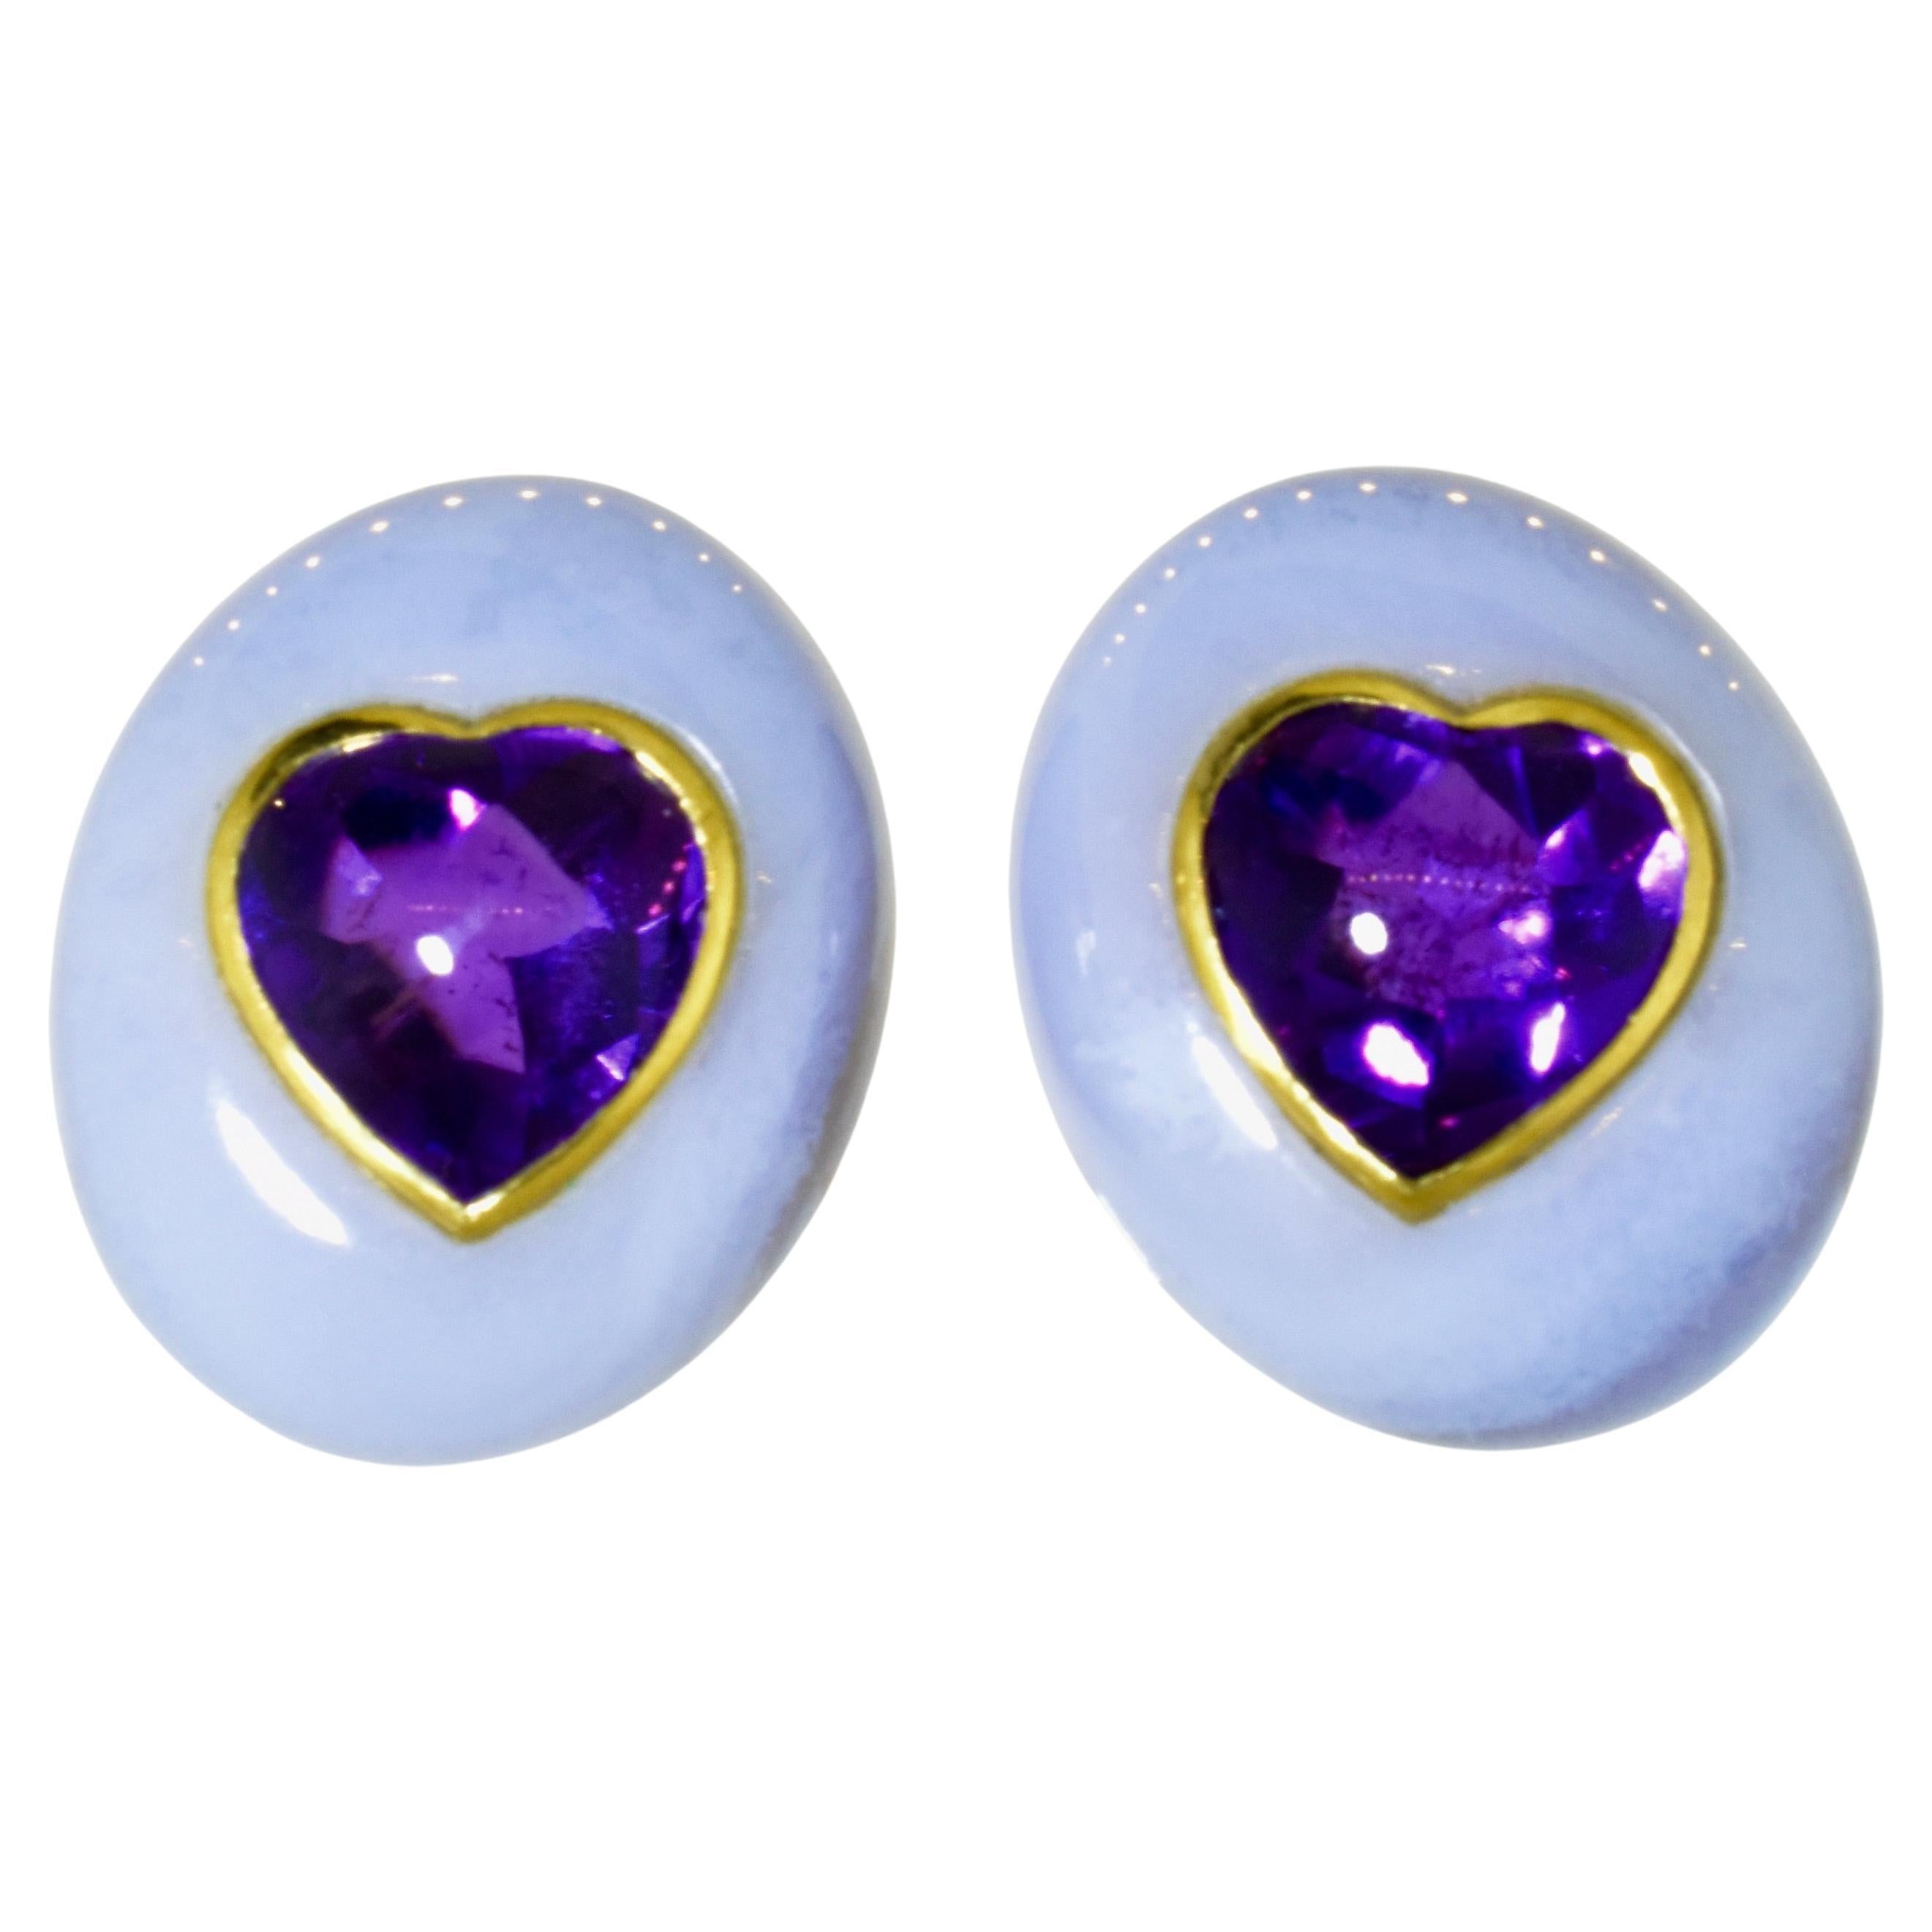 Contemporary Angela Cummings Earrings in 18K and Centering Heart Shaped Amethysts